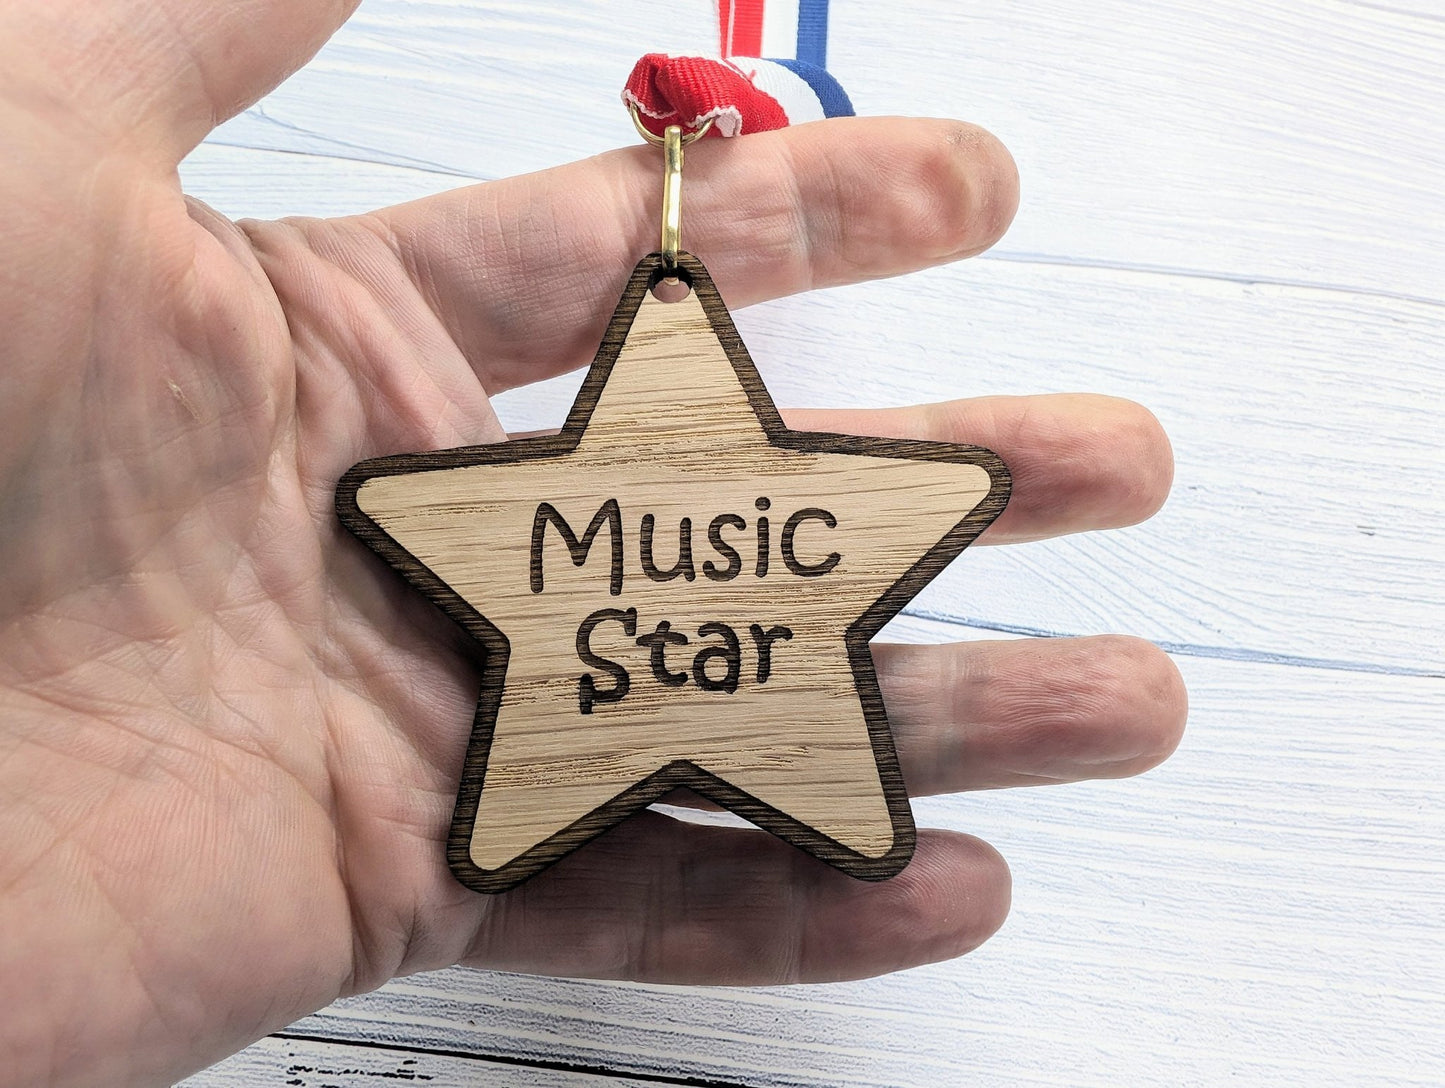 Personalised School Achievement Wooden Medals - Star-Shaped Awards for Students - Single or Bundle Pack, Sustainable Prize, Student Gift - CherryGroveCraft